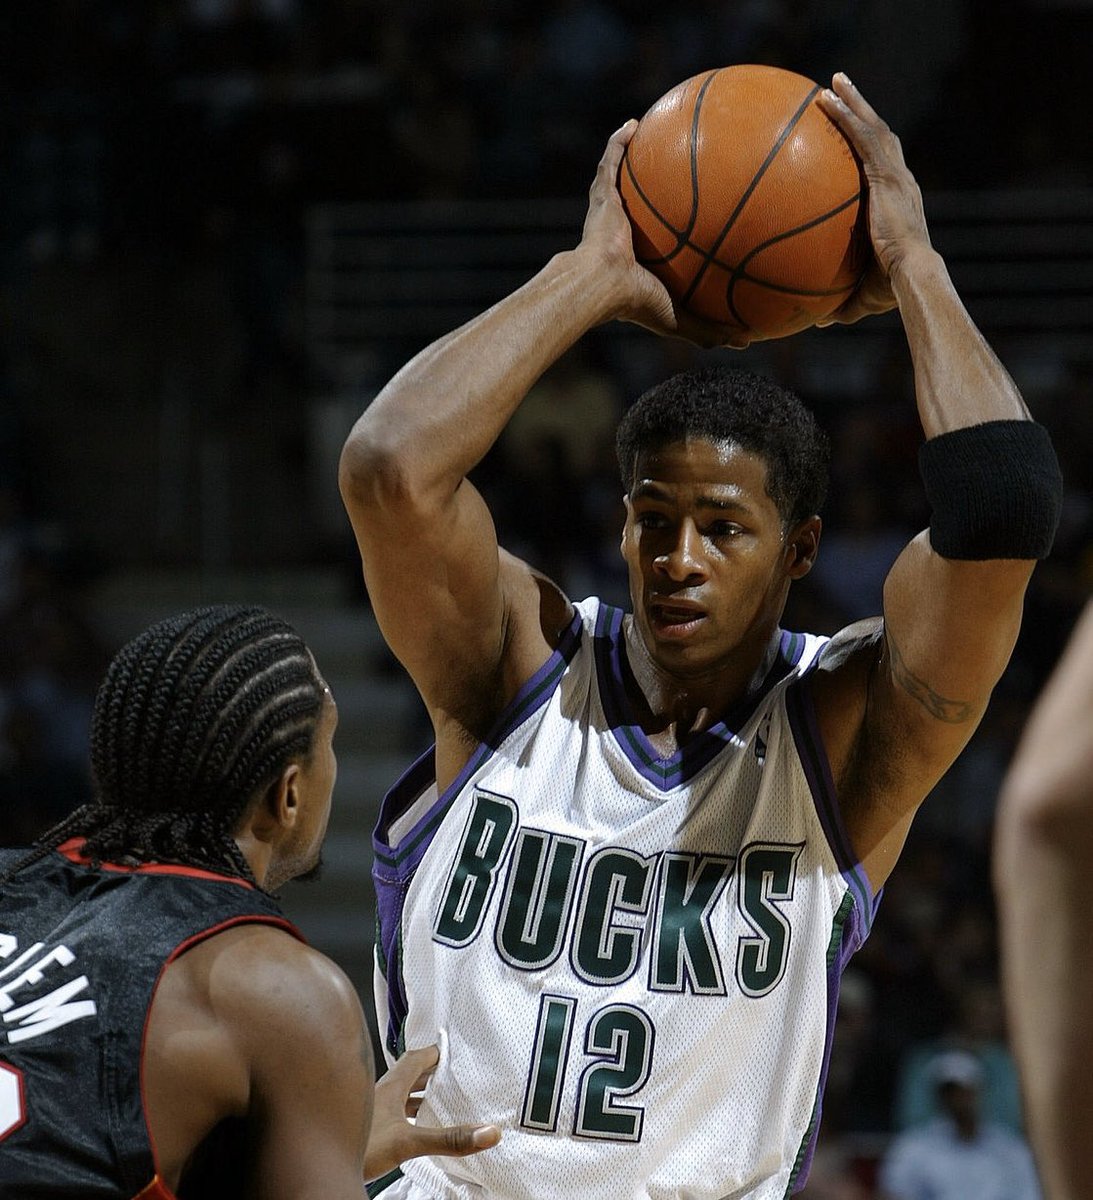 Kendall Gill’s 15th & final  #NBA   season was 2004-05, during which he played 14 games with the Milwaukee Bucks.